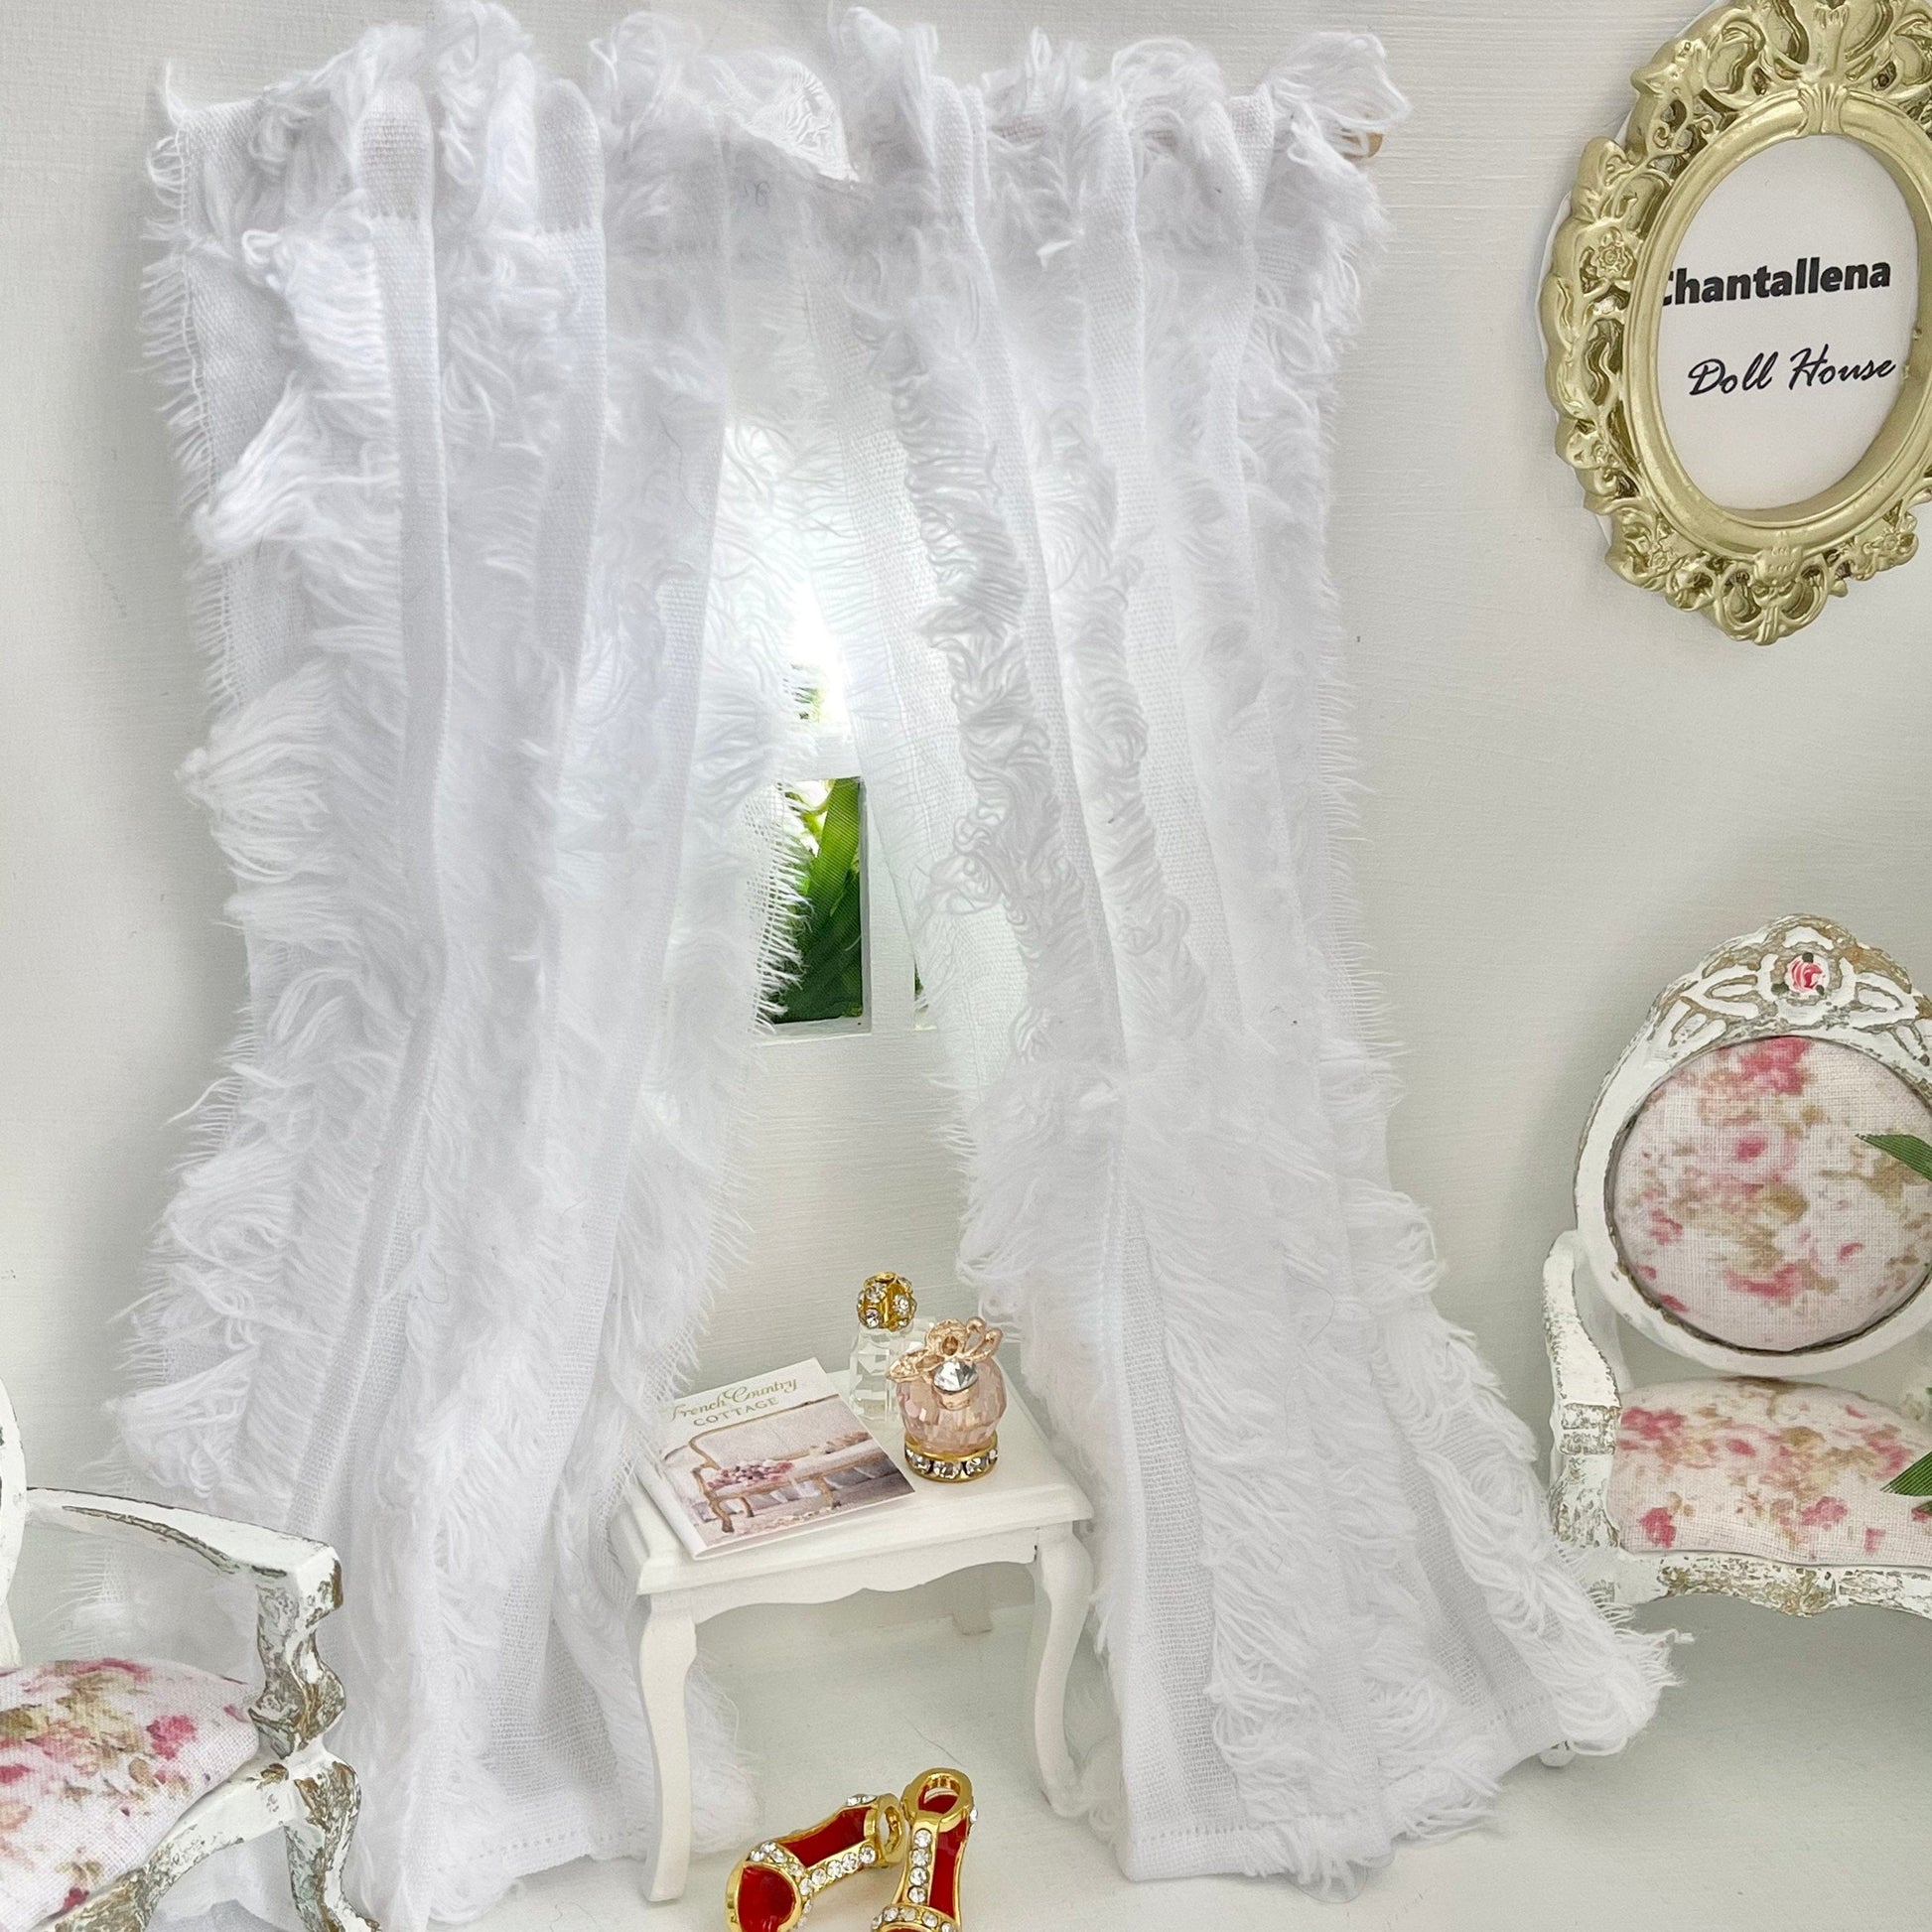 Chantallena Doll House CURTAINS - White Fringed 2 Panel Cotton Curtains | White Fringe | Soft Furnishings